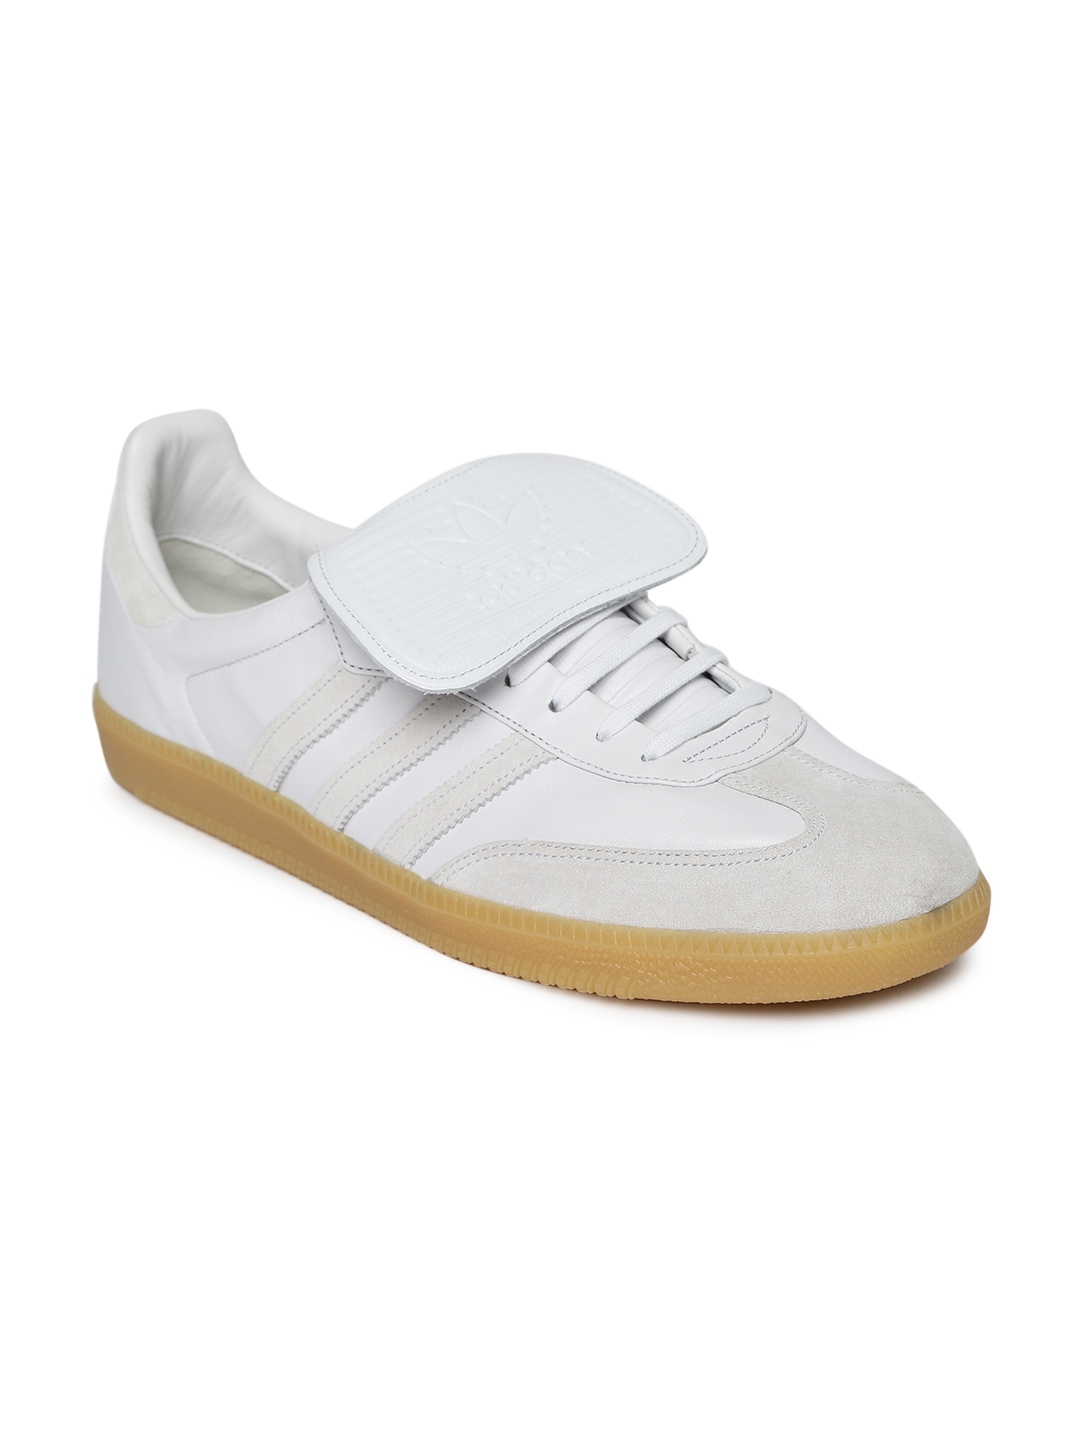 Buy Adidas Originals Men Off White Samba Recon Lt Leather Casual Shoes -  Casual Shoes For Men 6382879 | Myntra